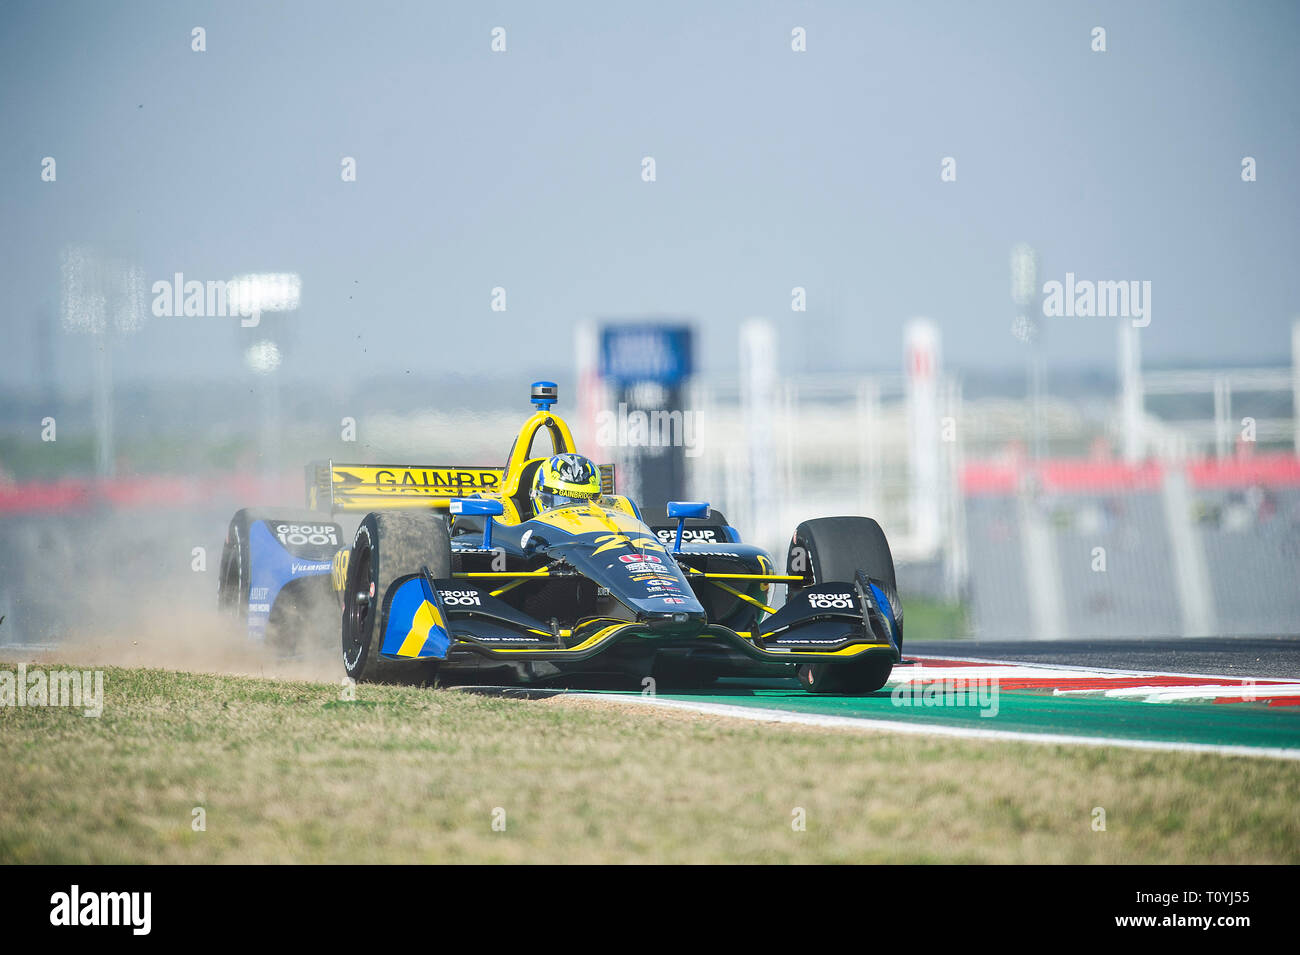 Austin, Texas, USA. 22nd Mar, 2019. Zach Veach #26 Honda with Team Andretti Autosport in action Practice 1 at the Indycar Classic, Circuit of The Americas in Austin, Texas. Mario Cantu/CSM/Alamy Live News Stock Photo